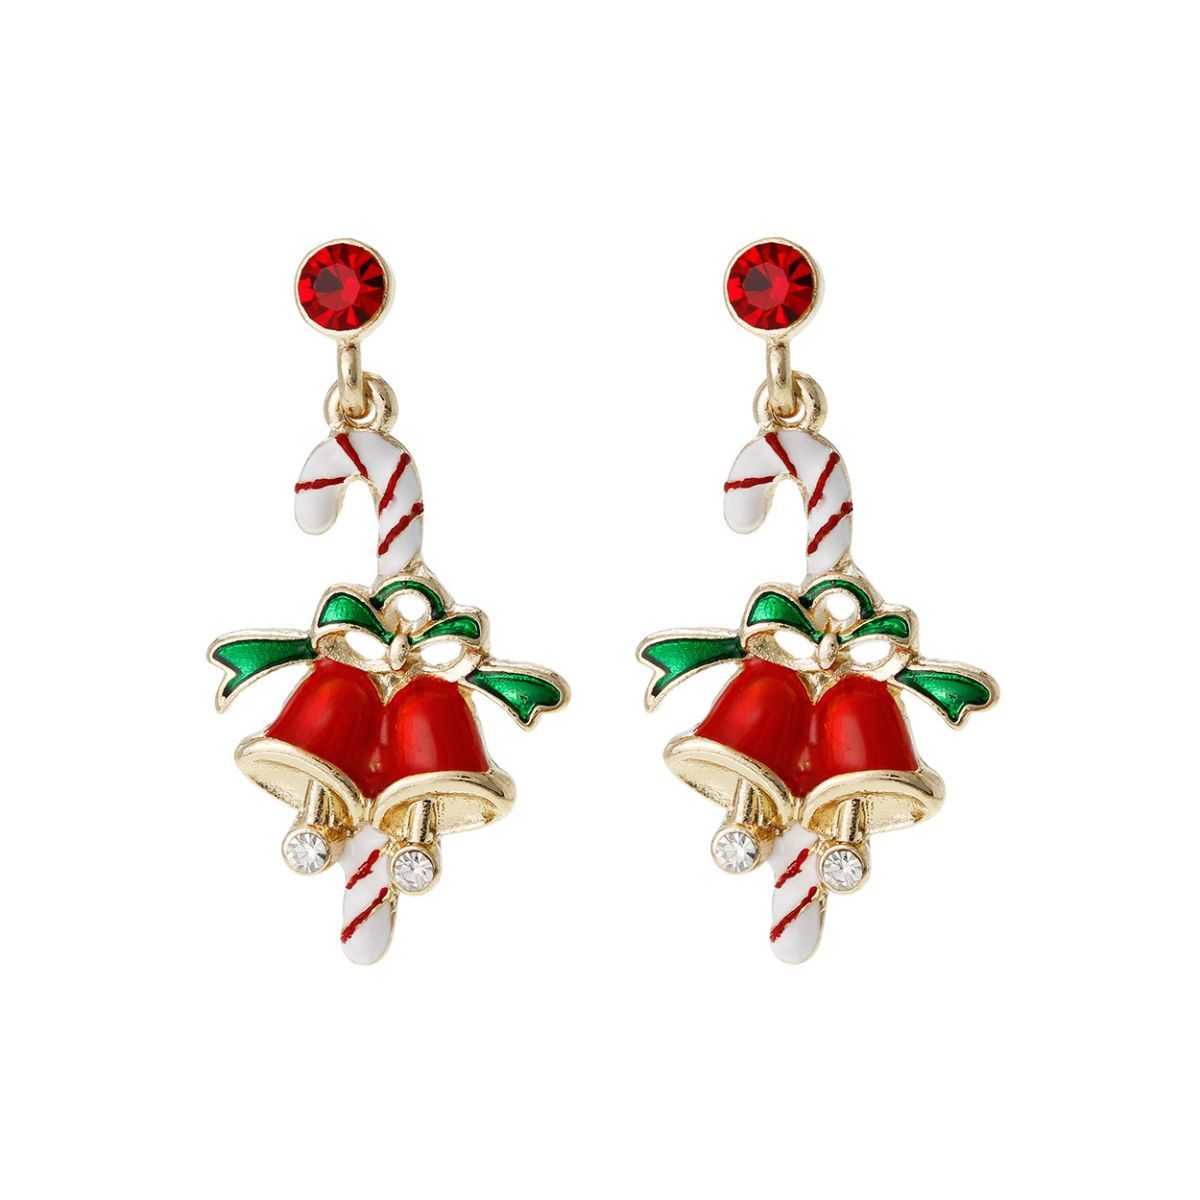 Candy Cane and Bell Earrings